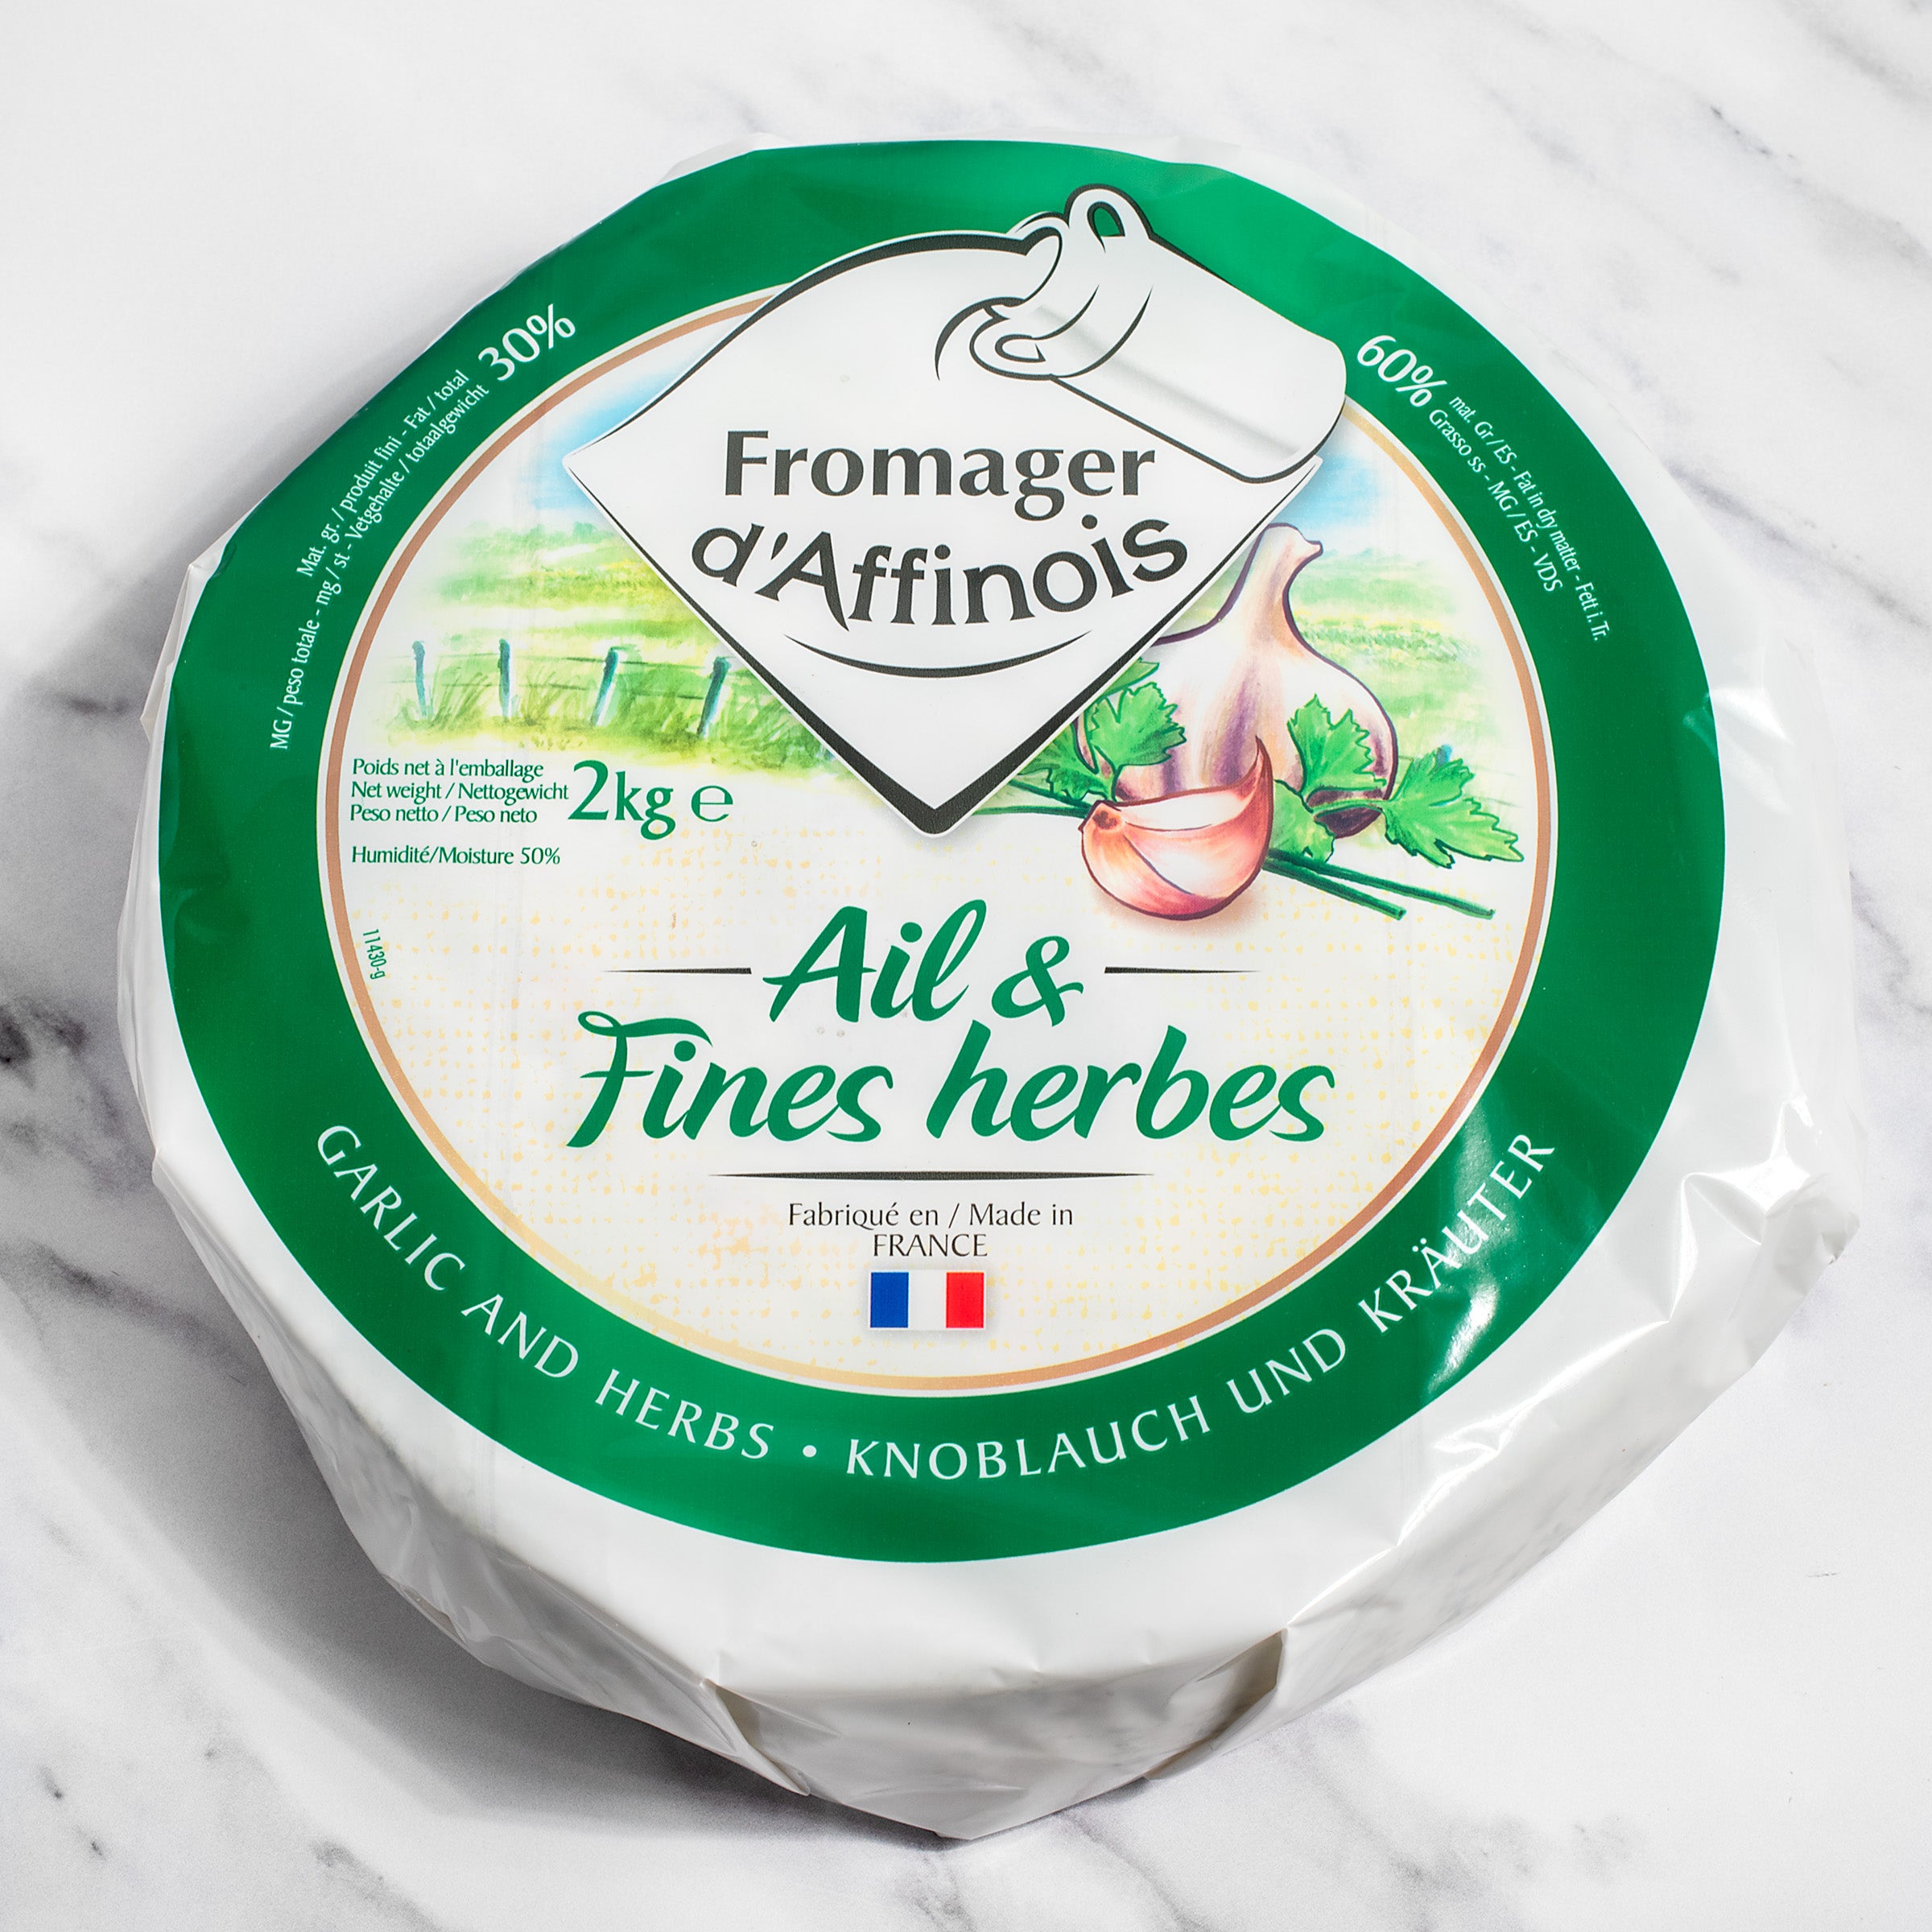 Cheese/Fromagerie Guilloteau/Cheese Garlic & d\'Affinois Herb igourmet with – Fromager